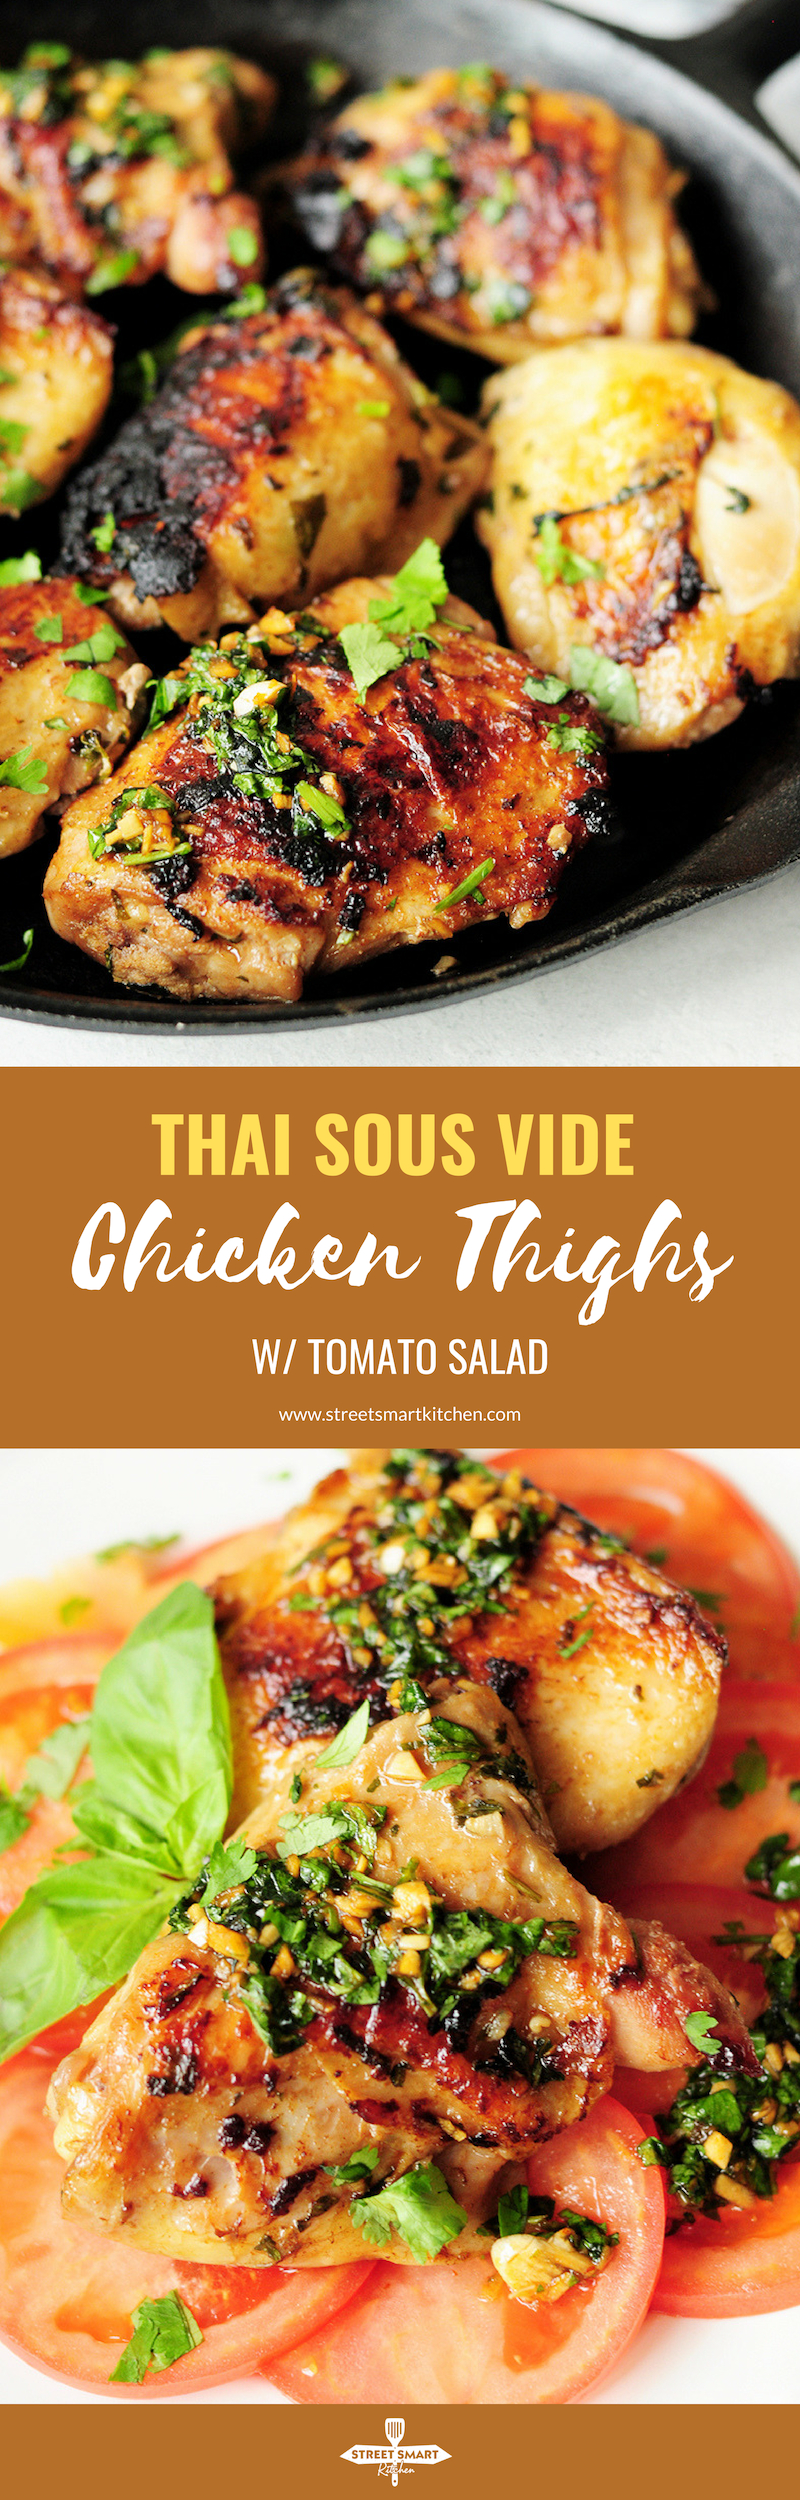 Chicken thighs marinated in a Thai sauce, and sous vide to perfection, then seared to be crispy outside. They are served over a tasty tomato salad to complete a low-carb and delicious meal.